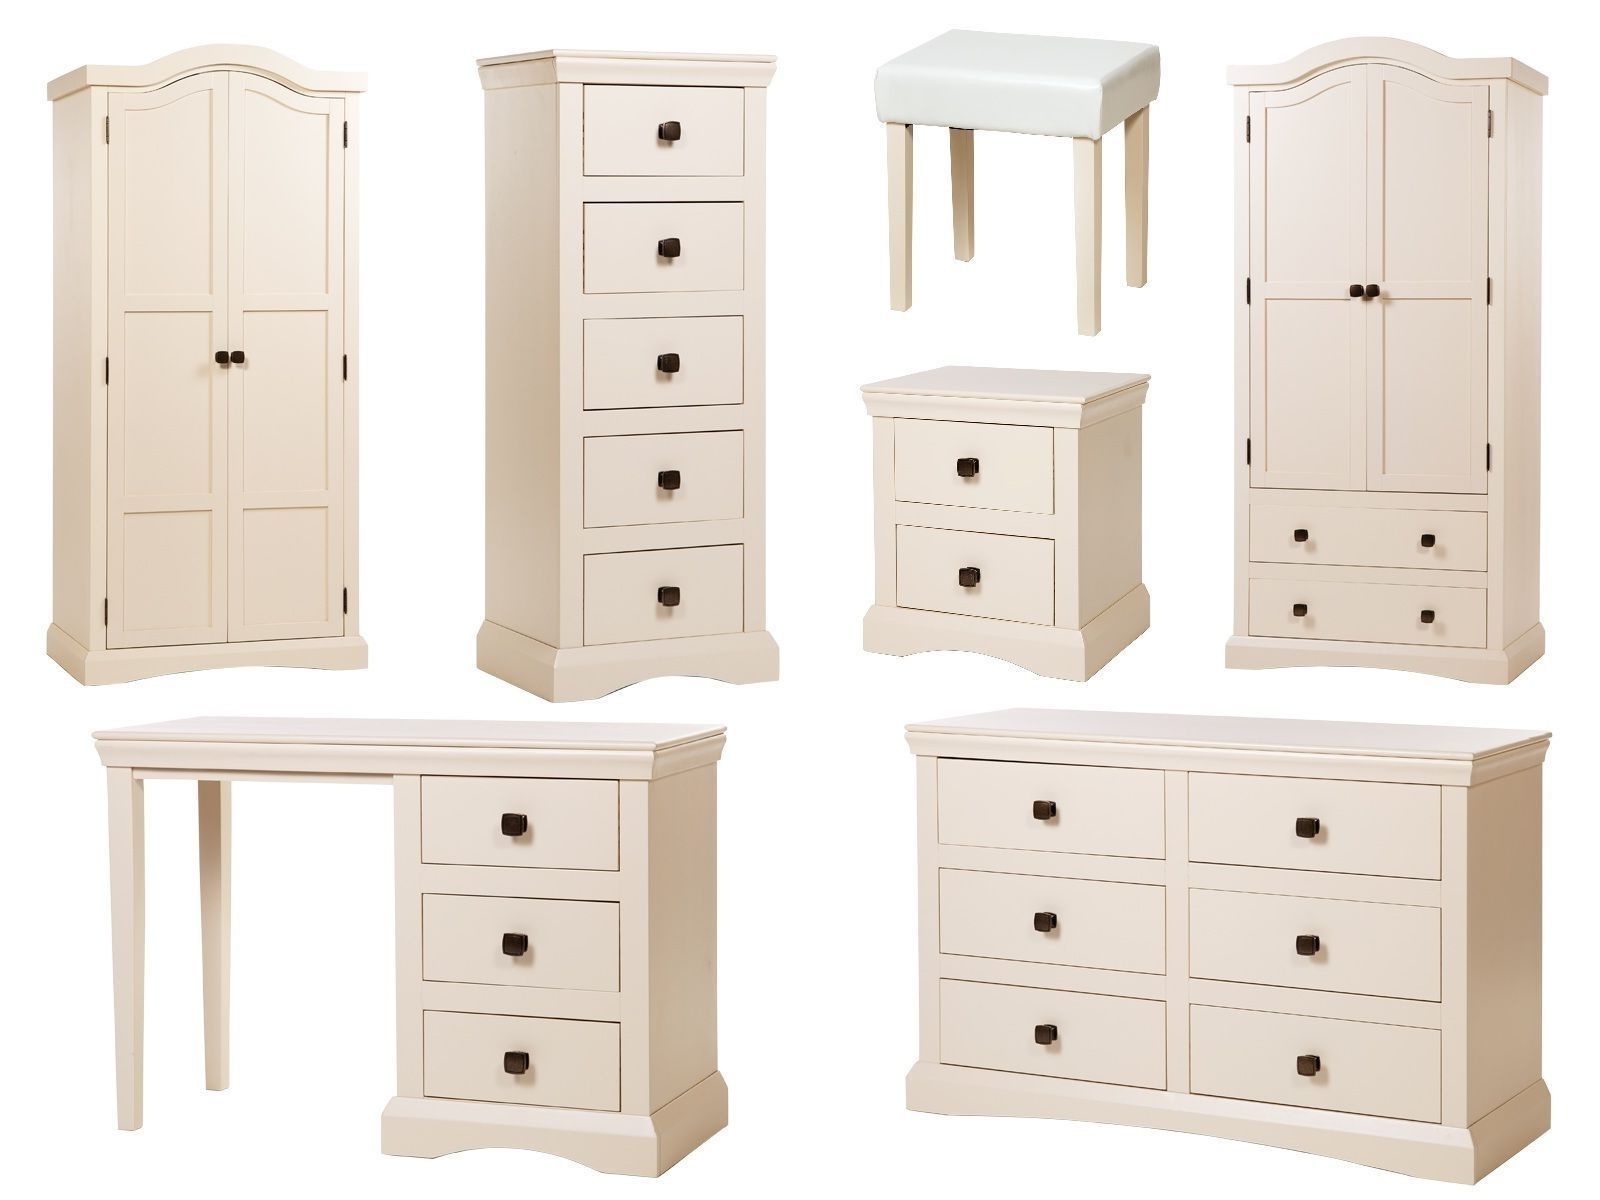 Trendy Shabby Chic Wardrobes Intended For Cream Painted Shabby Chic Wood Bedroom Furniture – Wardrobes Chest (View 15 of 15)